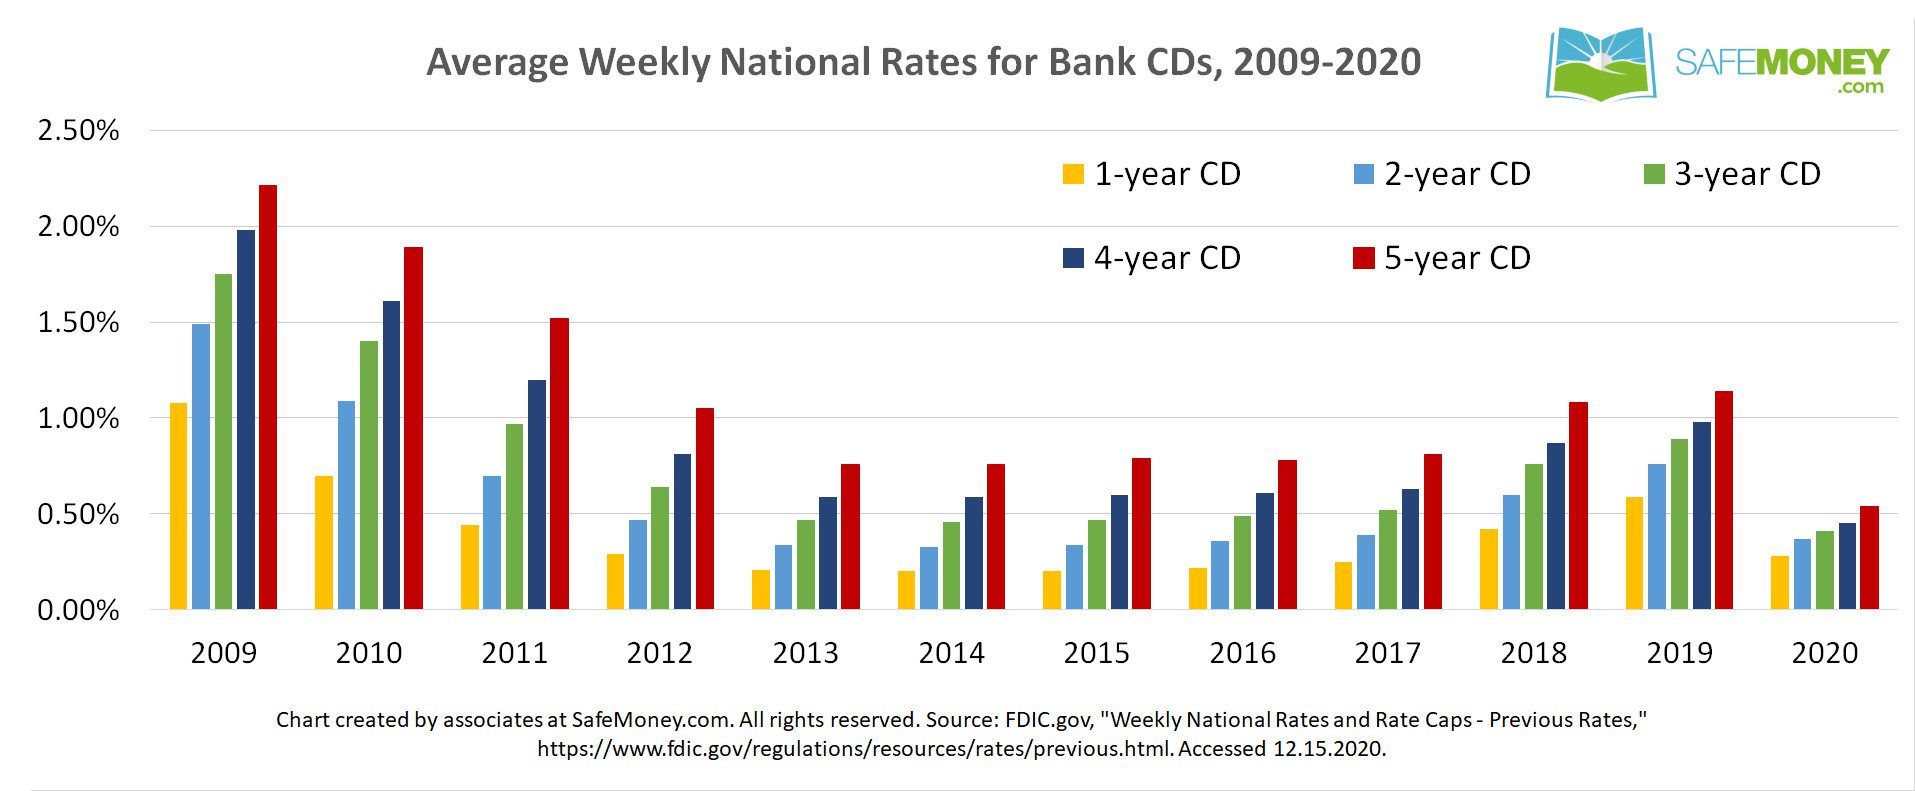 What Have Bank CD Interest Rates Been the Past Ten Years?